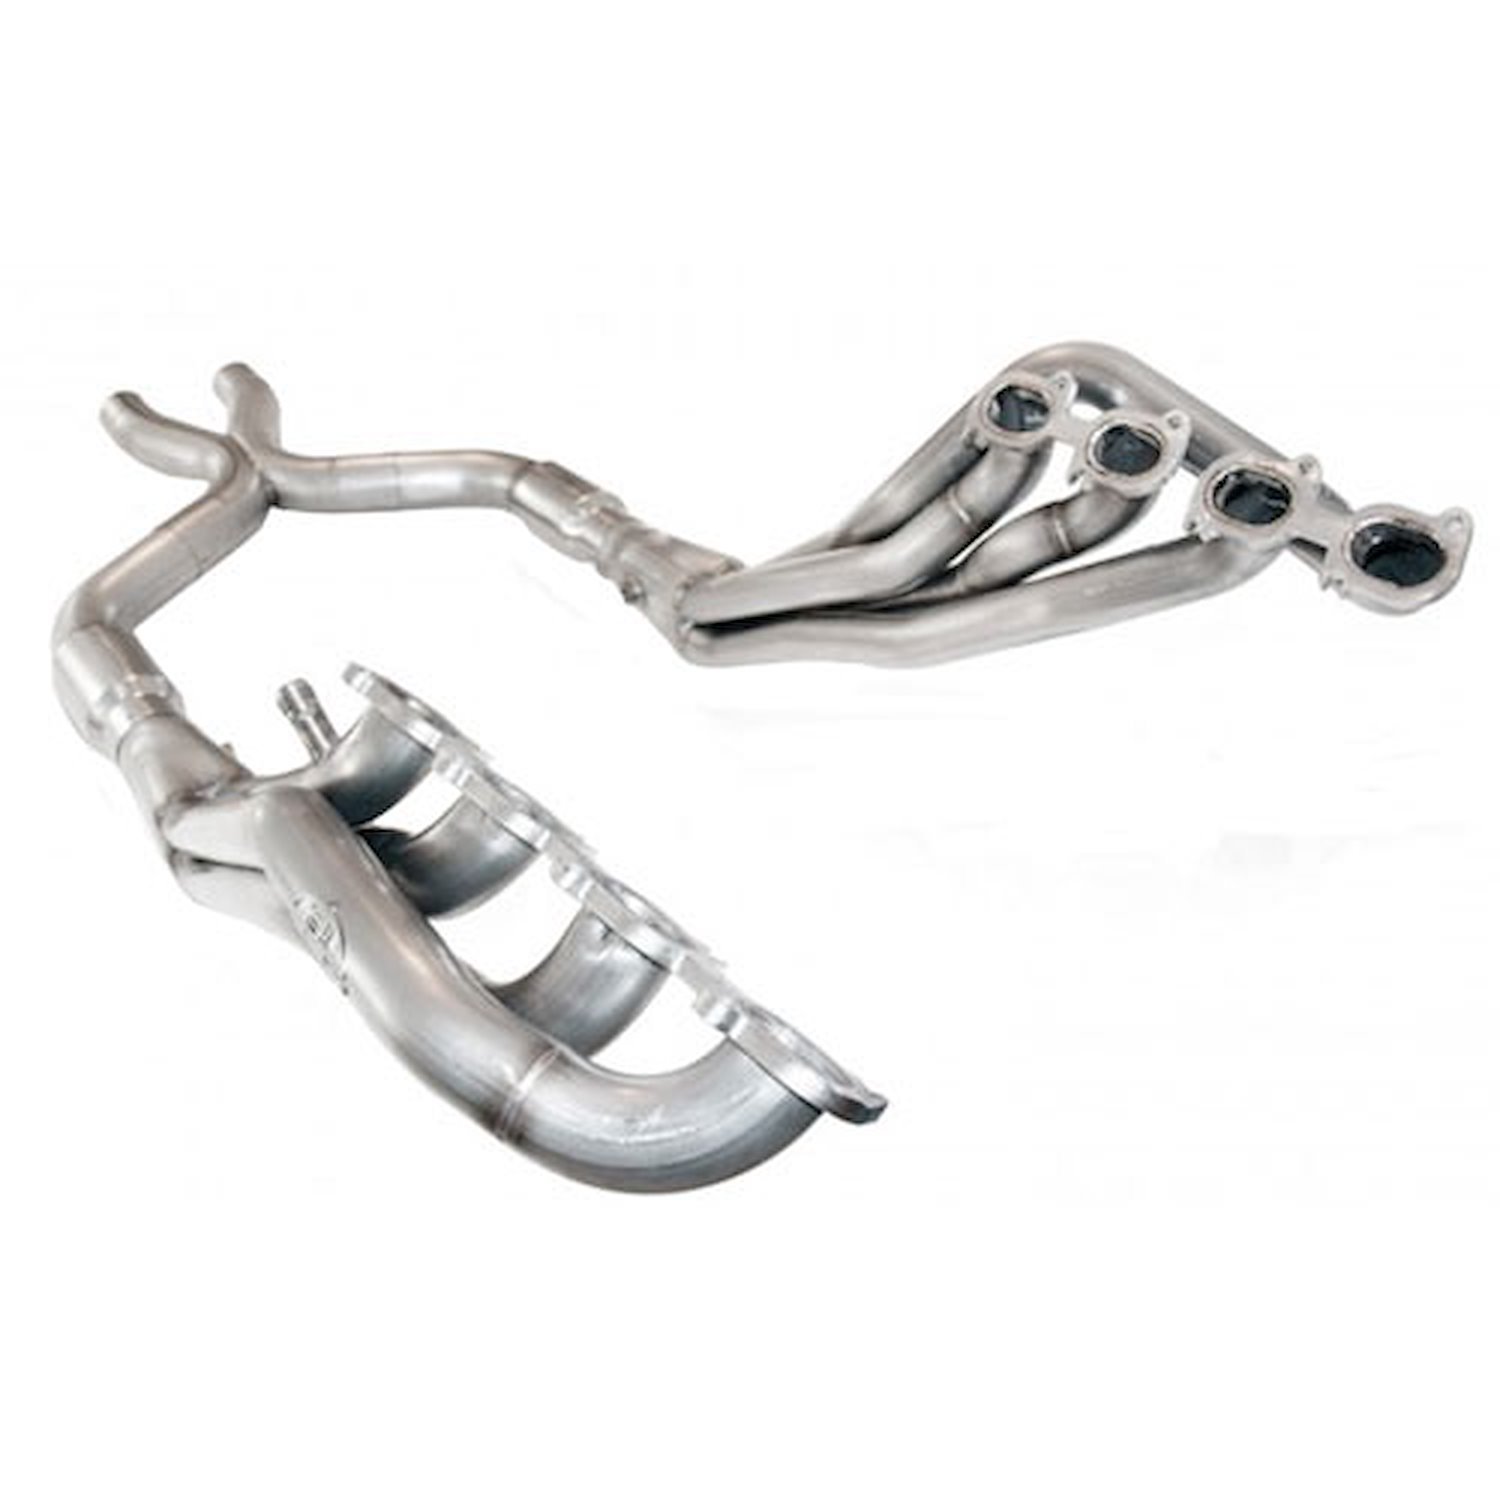 2011-12 Shelby GT500 1 7-8 headers and lead pipes. Tig welded 304 s/s headers with 3/8 thick flanges